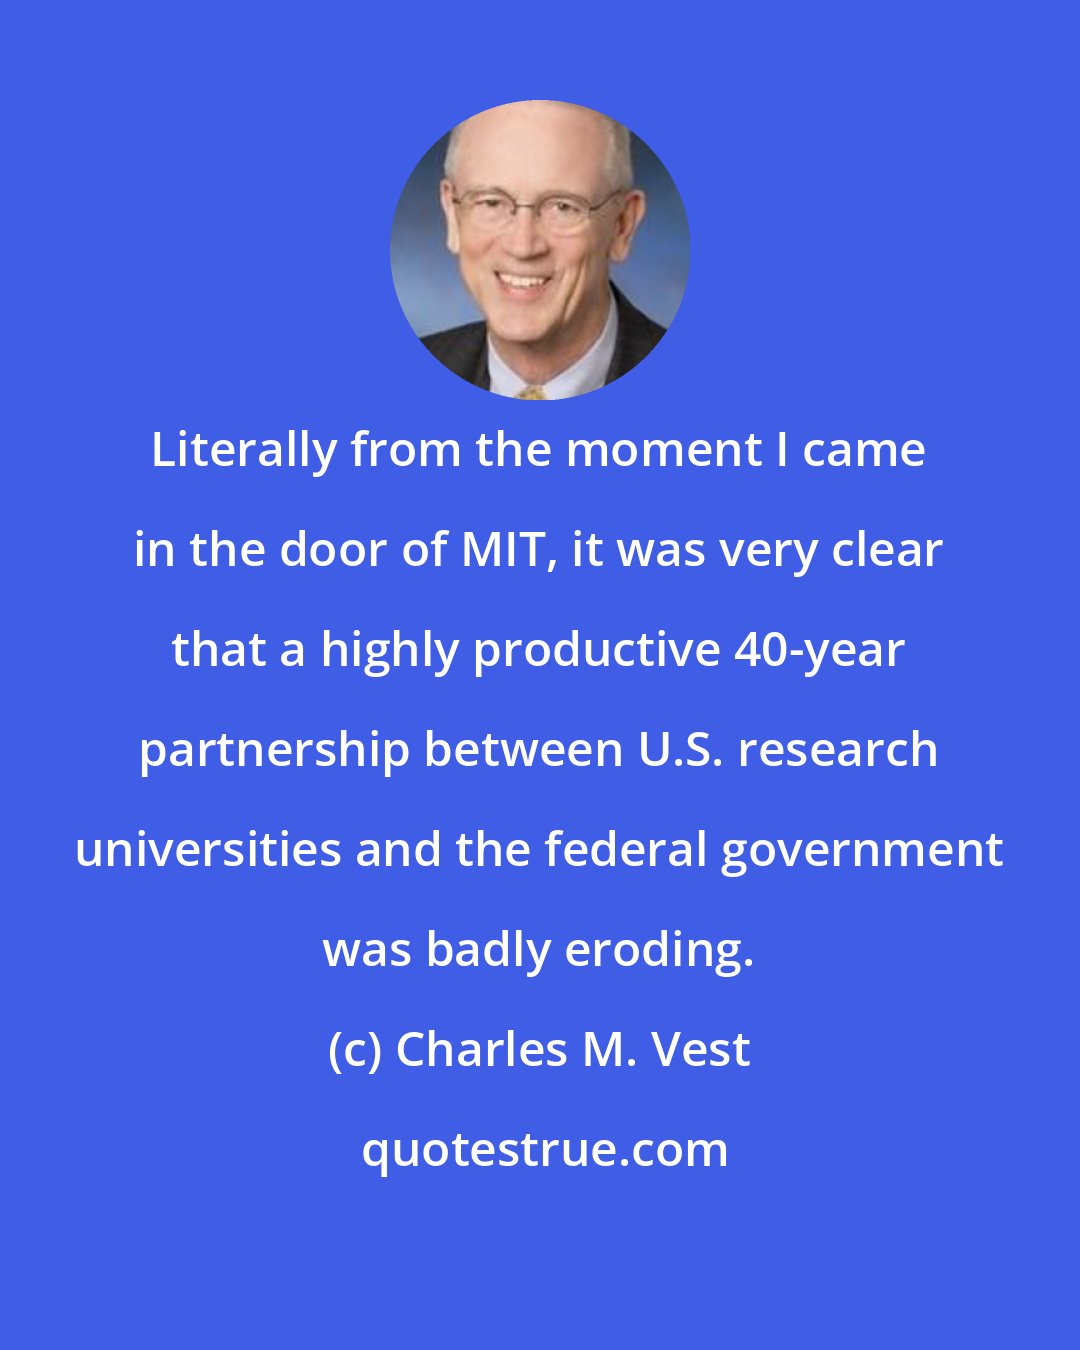 Charles M. Vest: Literally from the moment I came in the door of MIT, it was very clear that a highly productive 40-year partnership between U.S. research universities and the federal government was badly eroding.